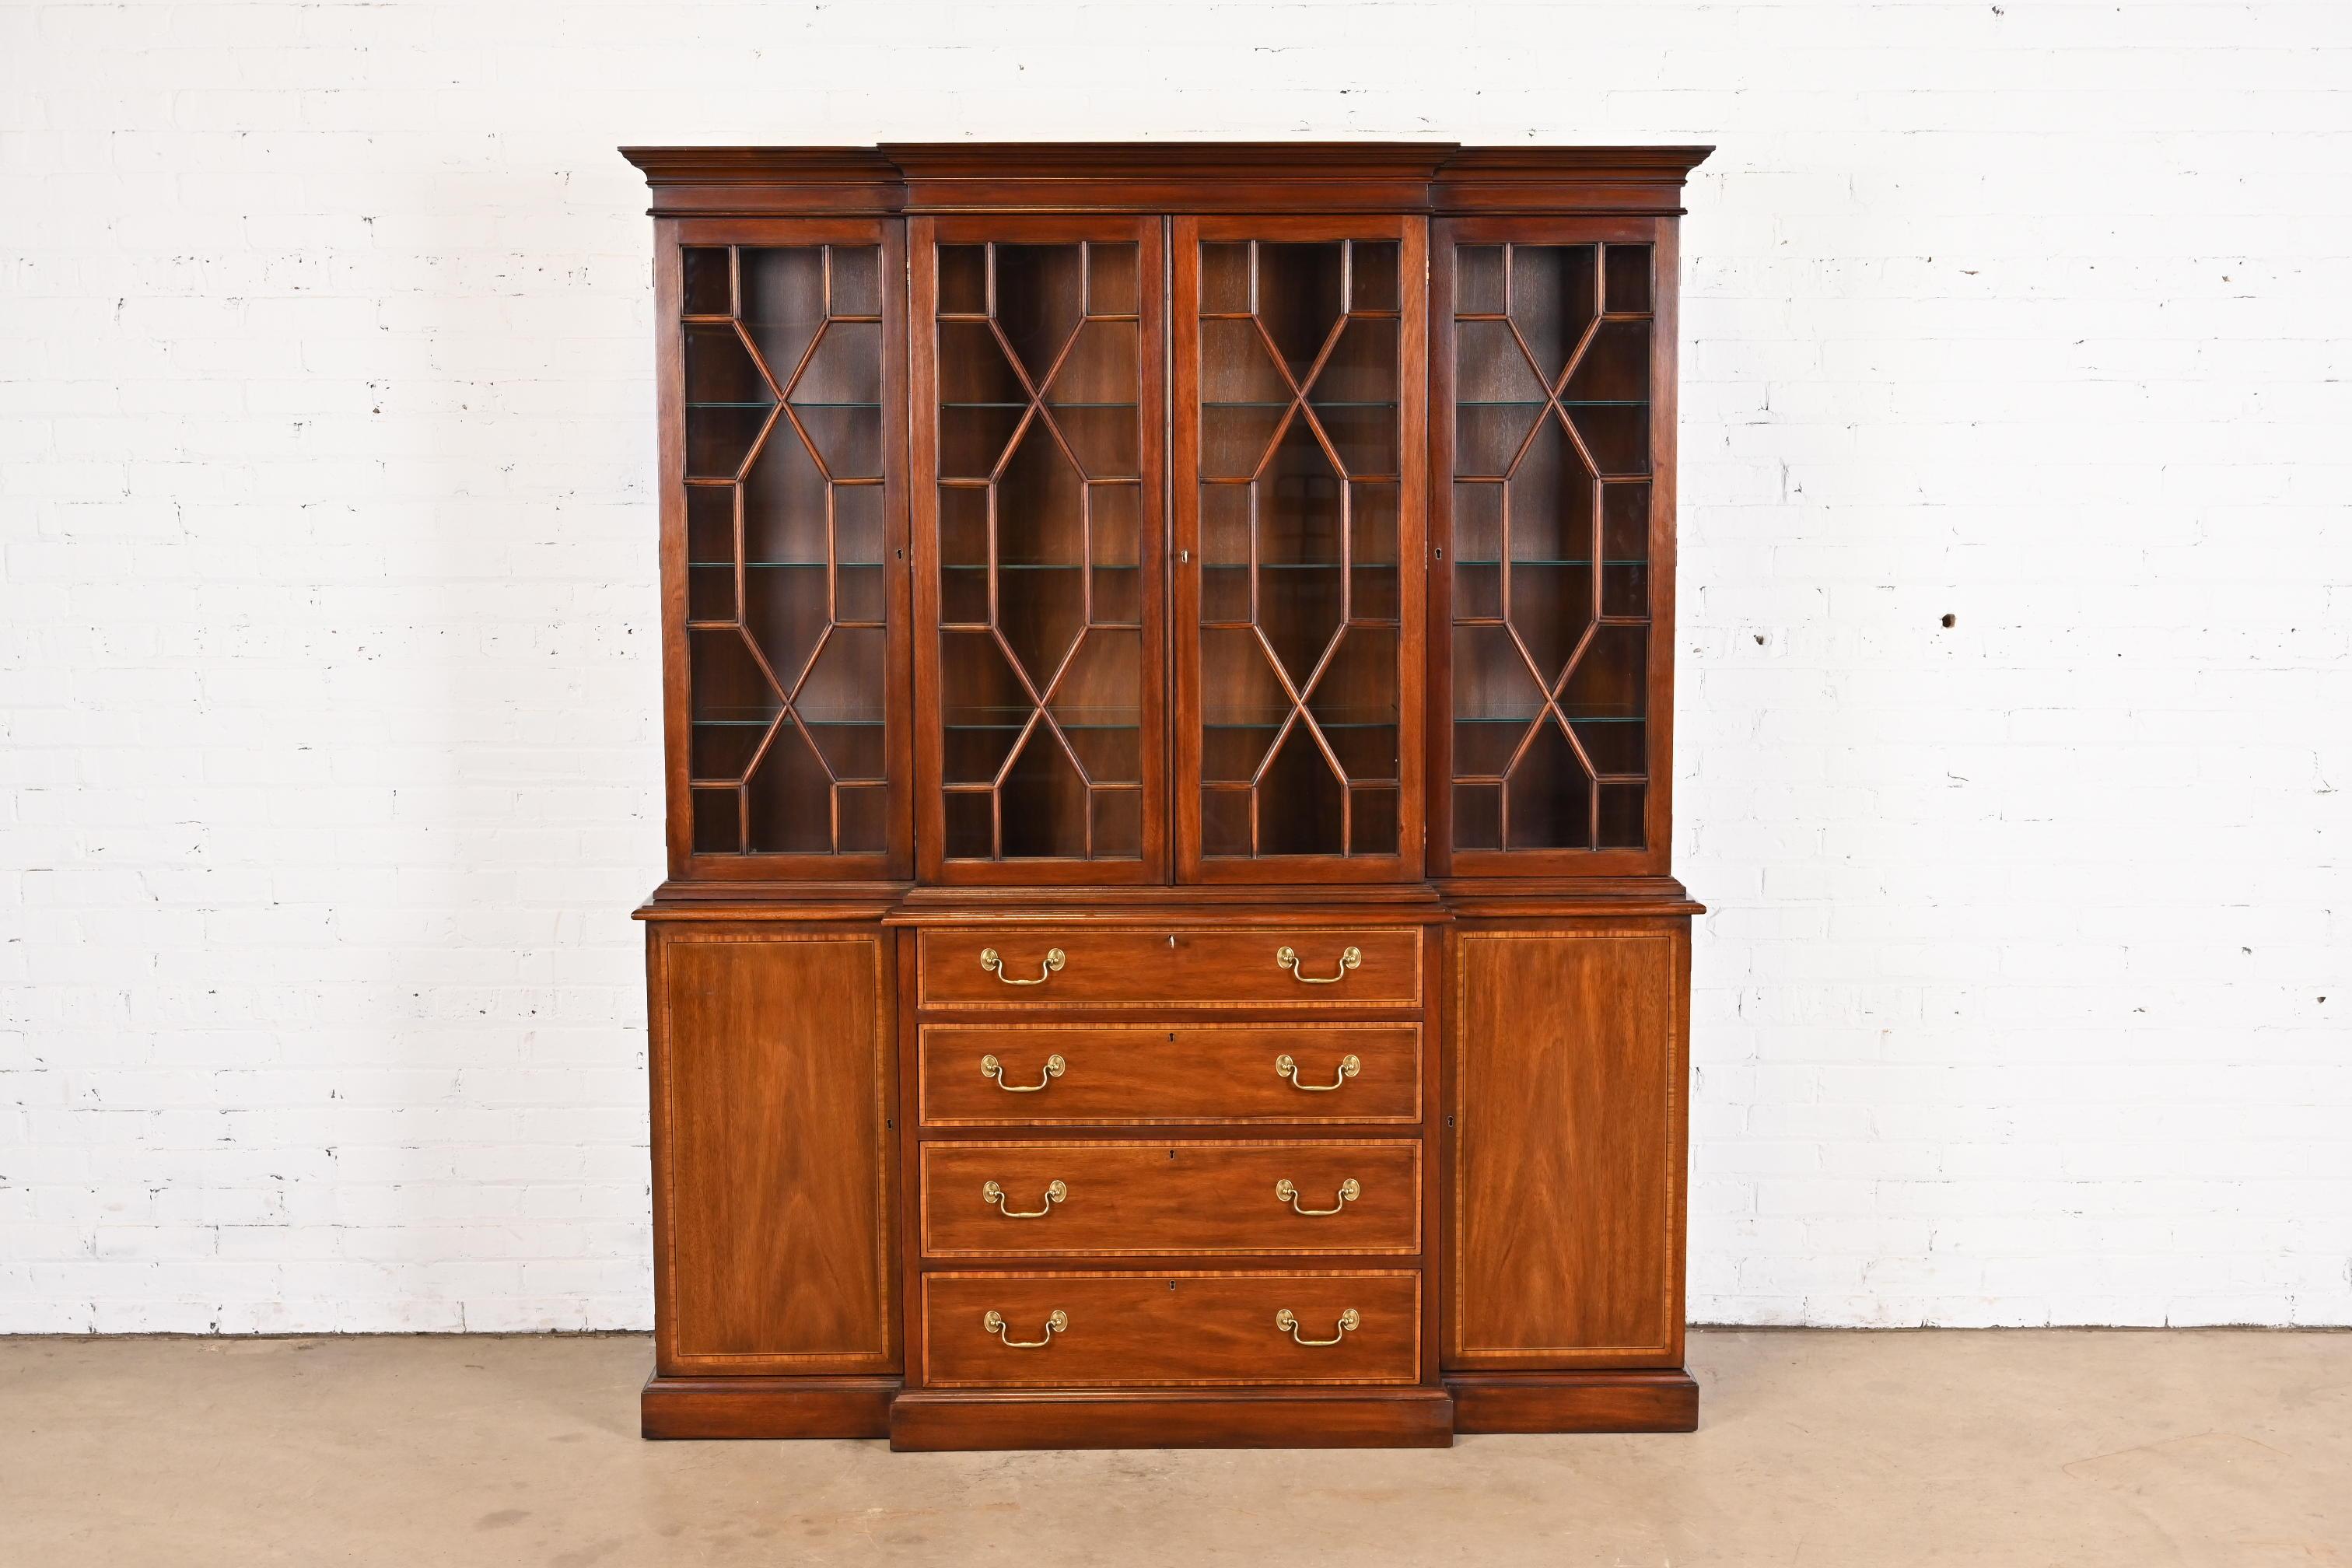 A gorgeous Georgian or Chippendale style lighted breakfront bookcase or dining cabinet

By Henkel Harris

USA, 1979

Mahogany, with satinwood banding, mullioned glass front doors, glass shelves, and original brass hardware. Lights have been tested